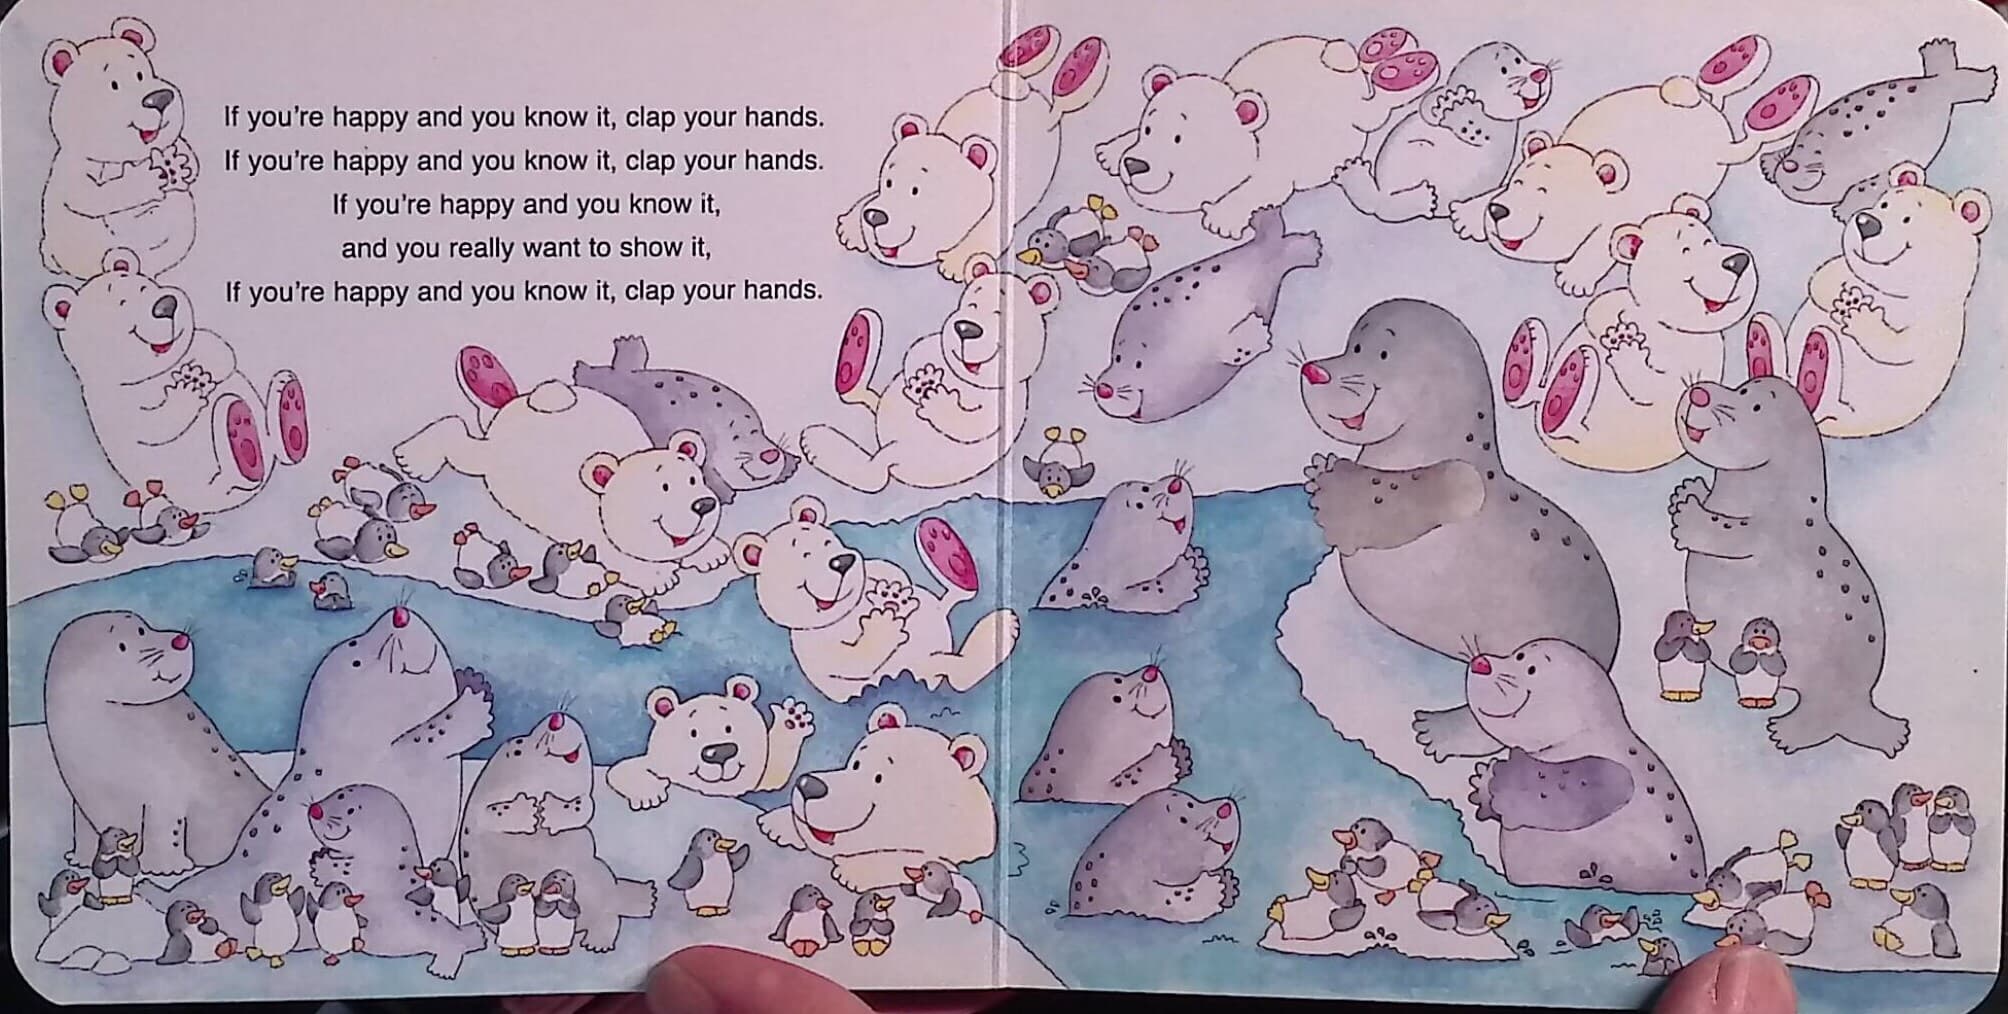 IF YOU'RE HAPPY AND YOU KNOW IT! board book